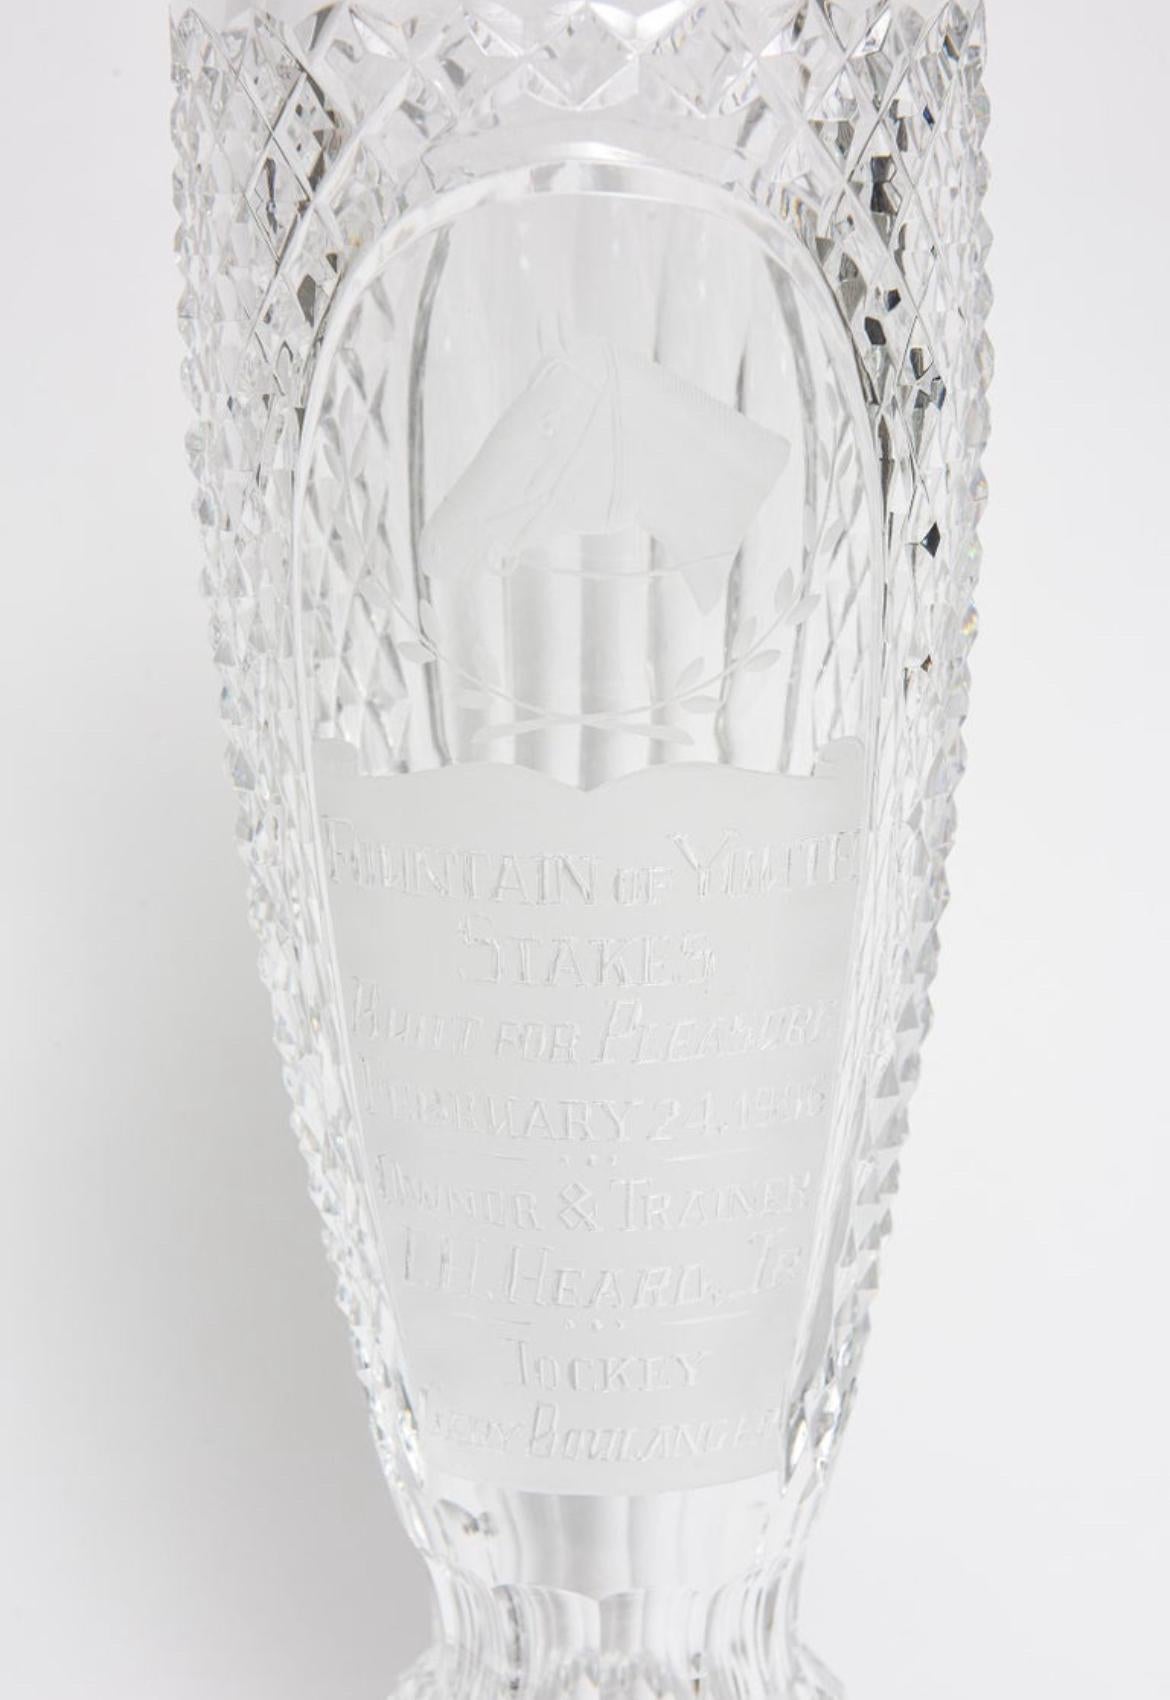 Waterford cut glass lead crystal horse racing trophy made into a tall narrow lidded jar or apothecary jar that has an etched horse head and is engraved Awarded at Fountain of Youth Stakes to Built for Pleasure on February 24, 1996.  It  measures